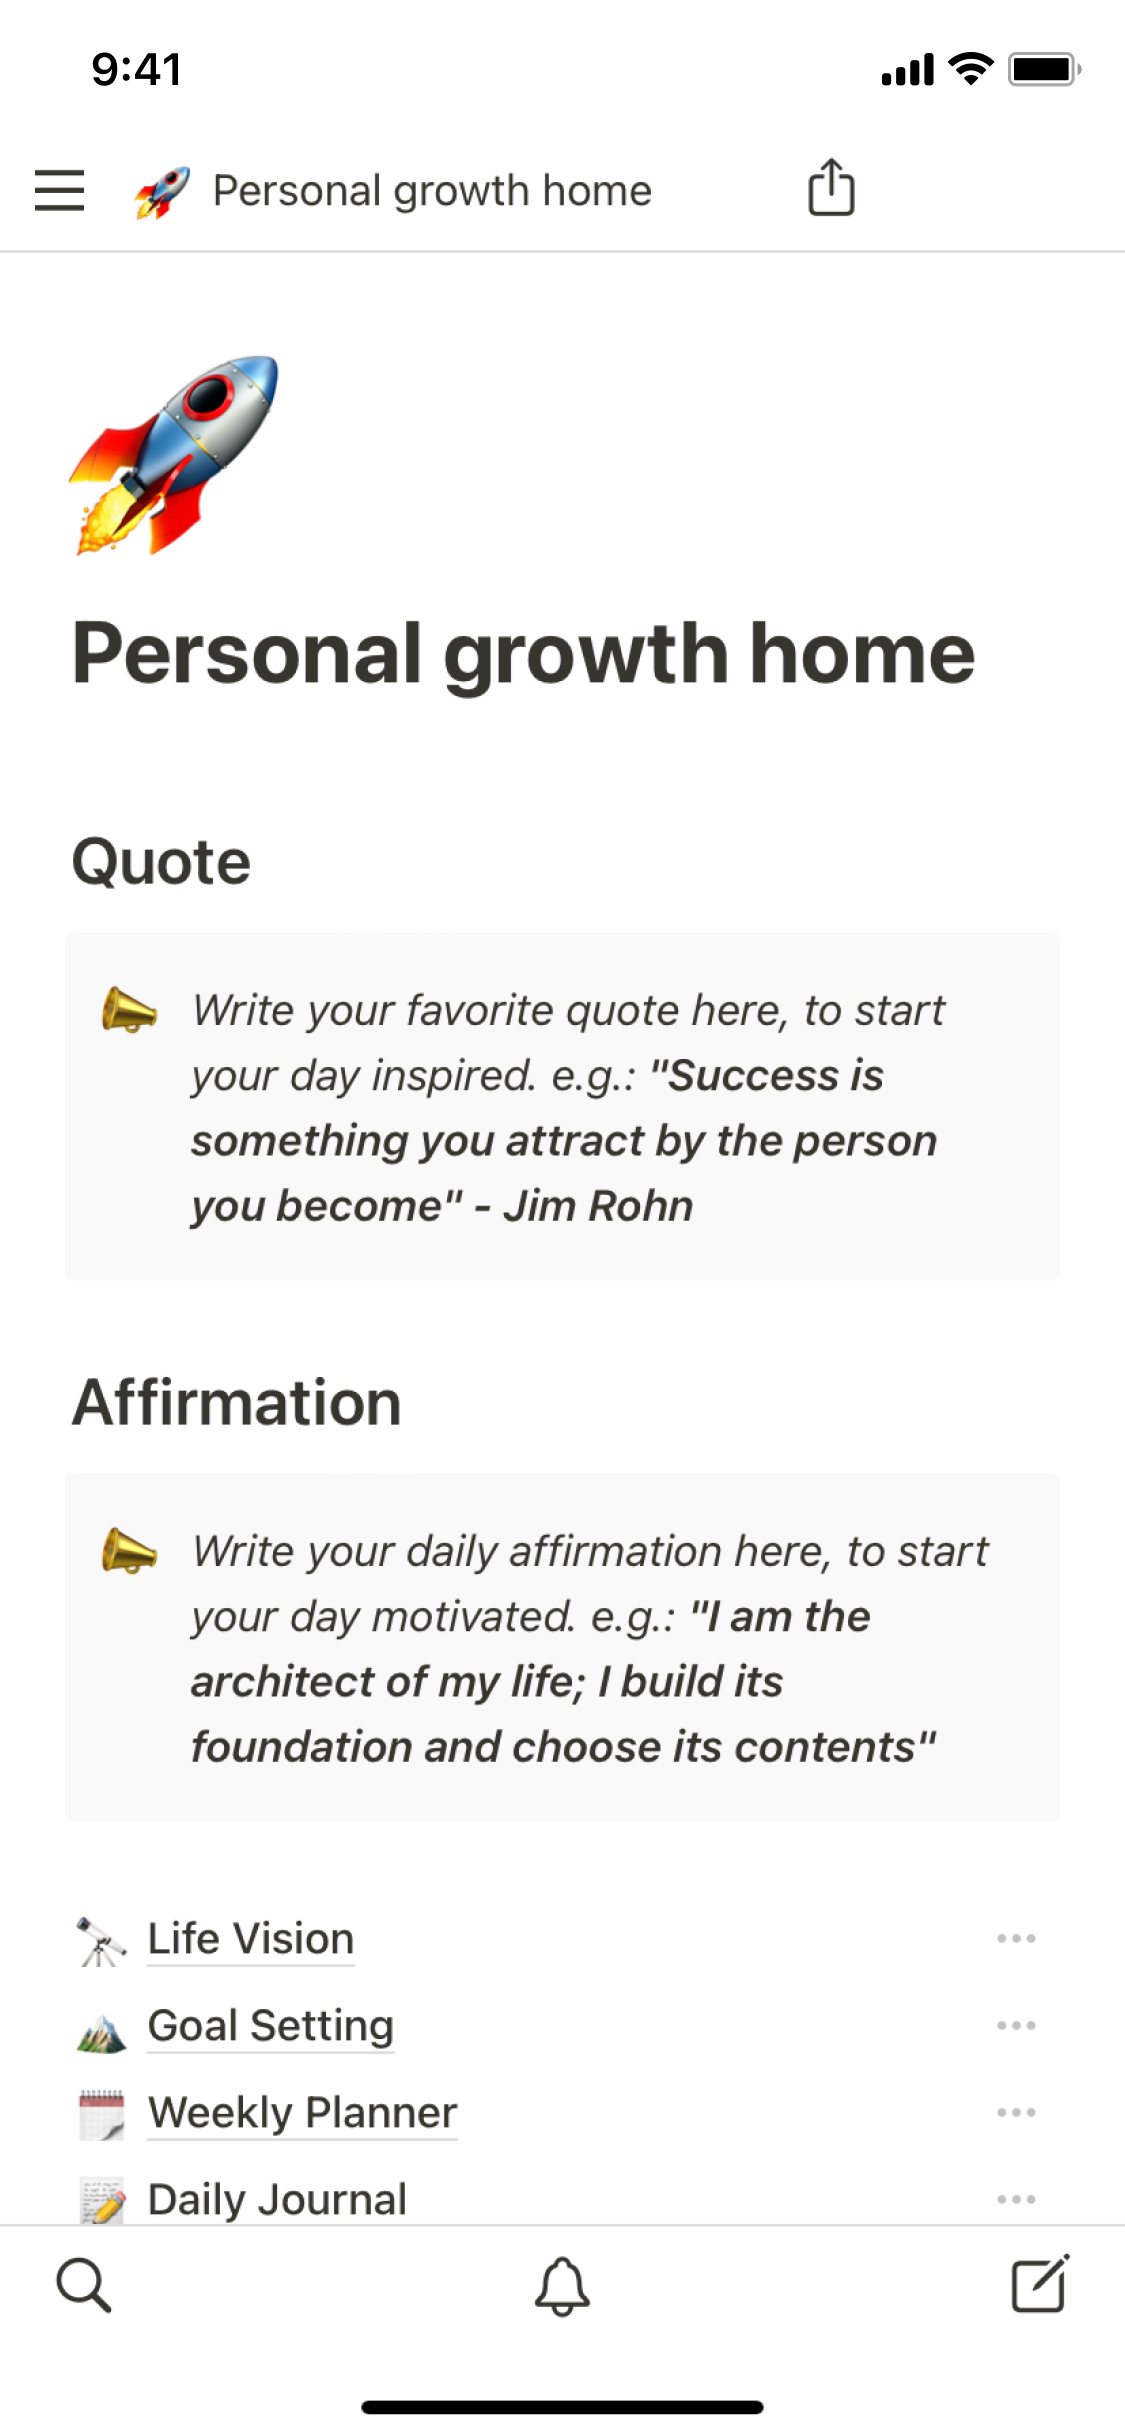 The mobile image for the Personal growth home template